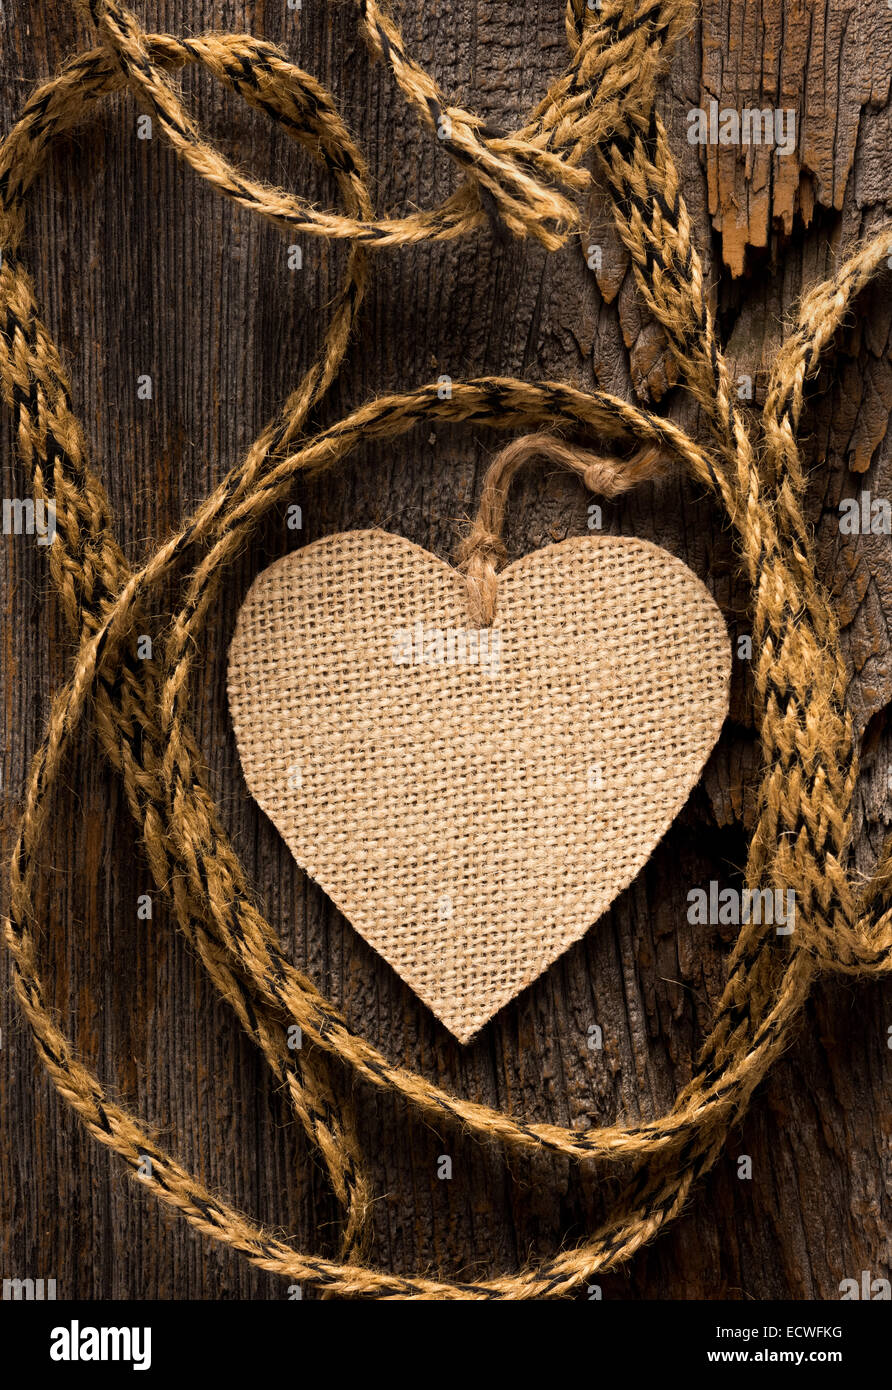 One burlap hear with coarse twine set of rustic wood Stock Photo